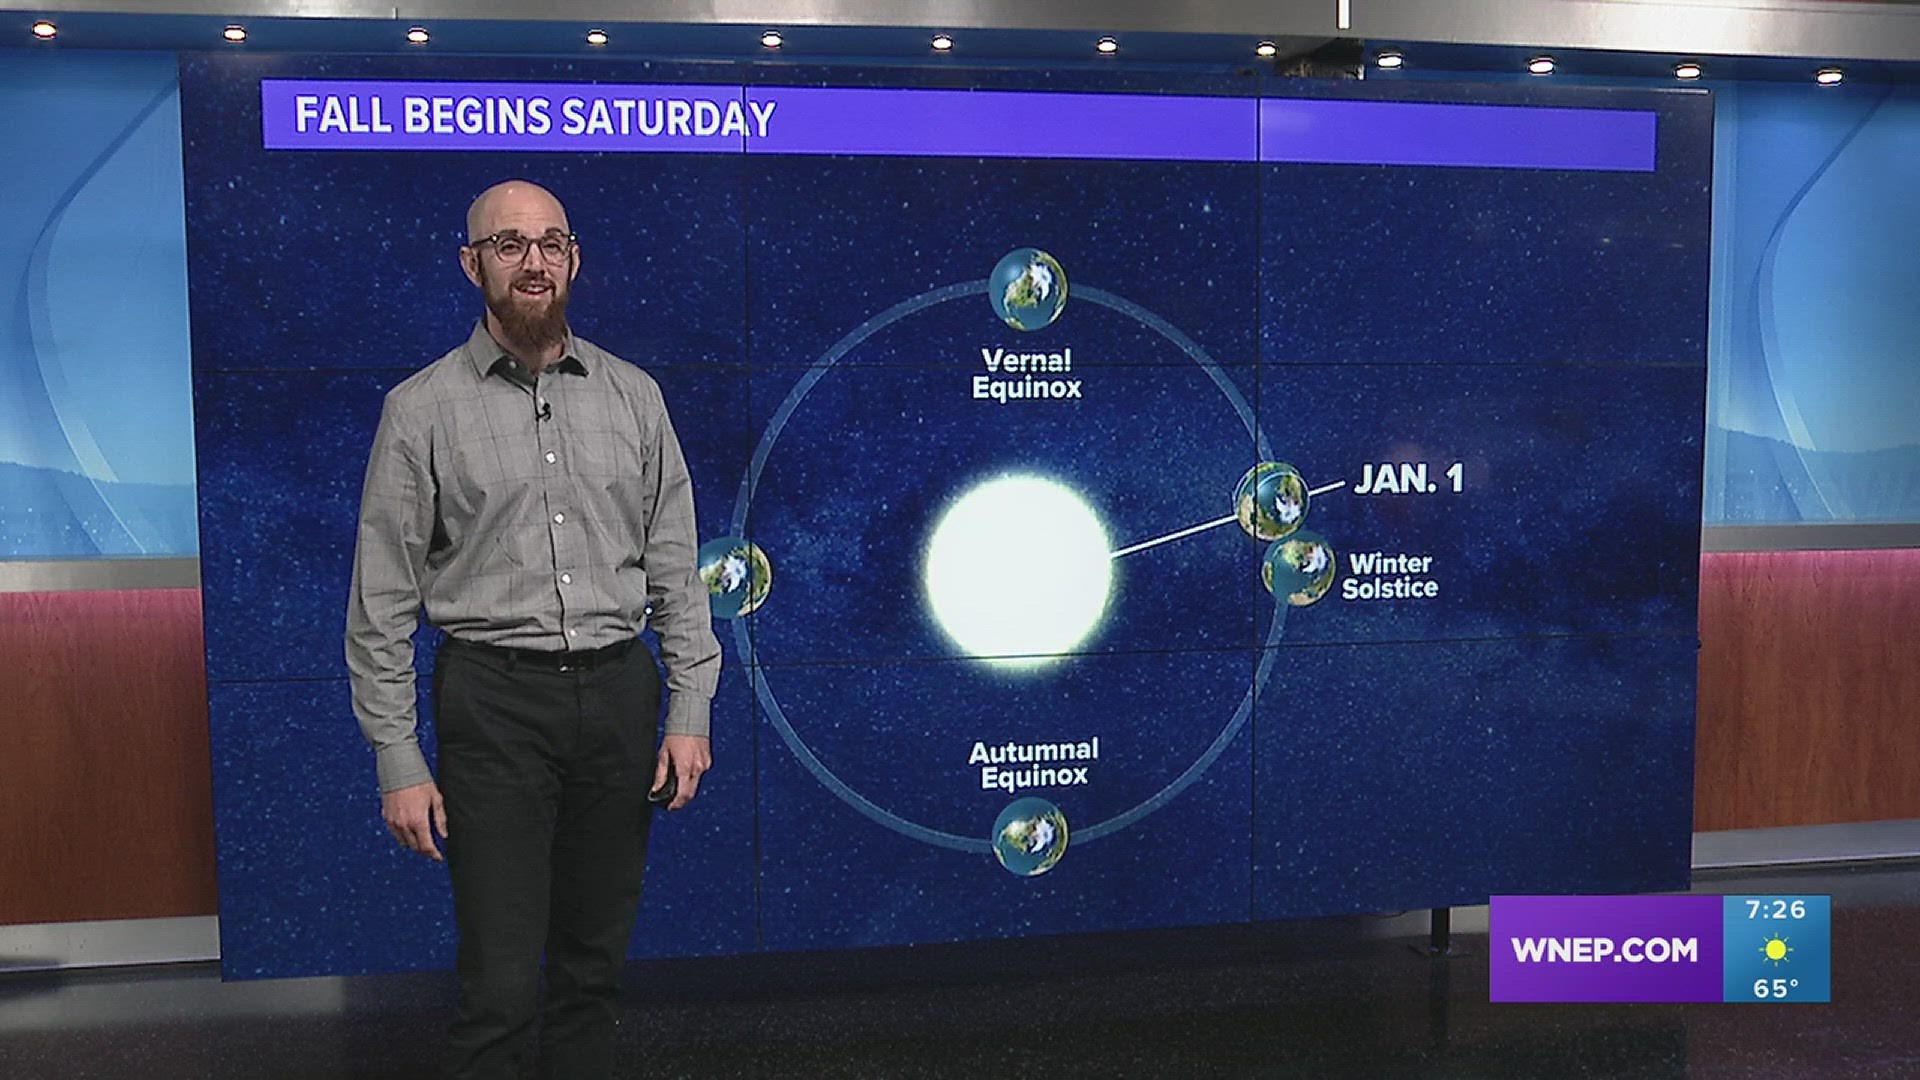 Skywatchers are hoping for a clear sky to see the Starlink satellite train. Newswatch 16's John Hickey shows us how to spot that in this Skywatch 16.